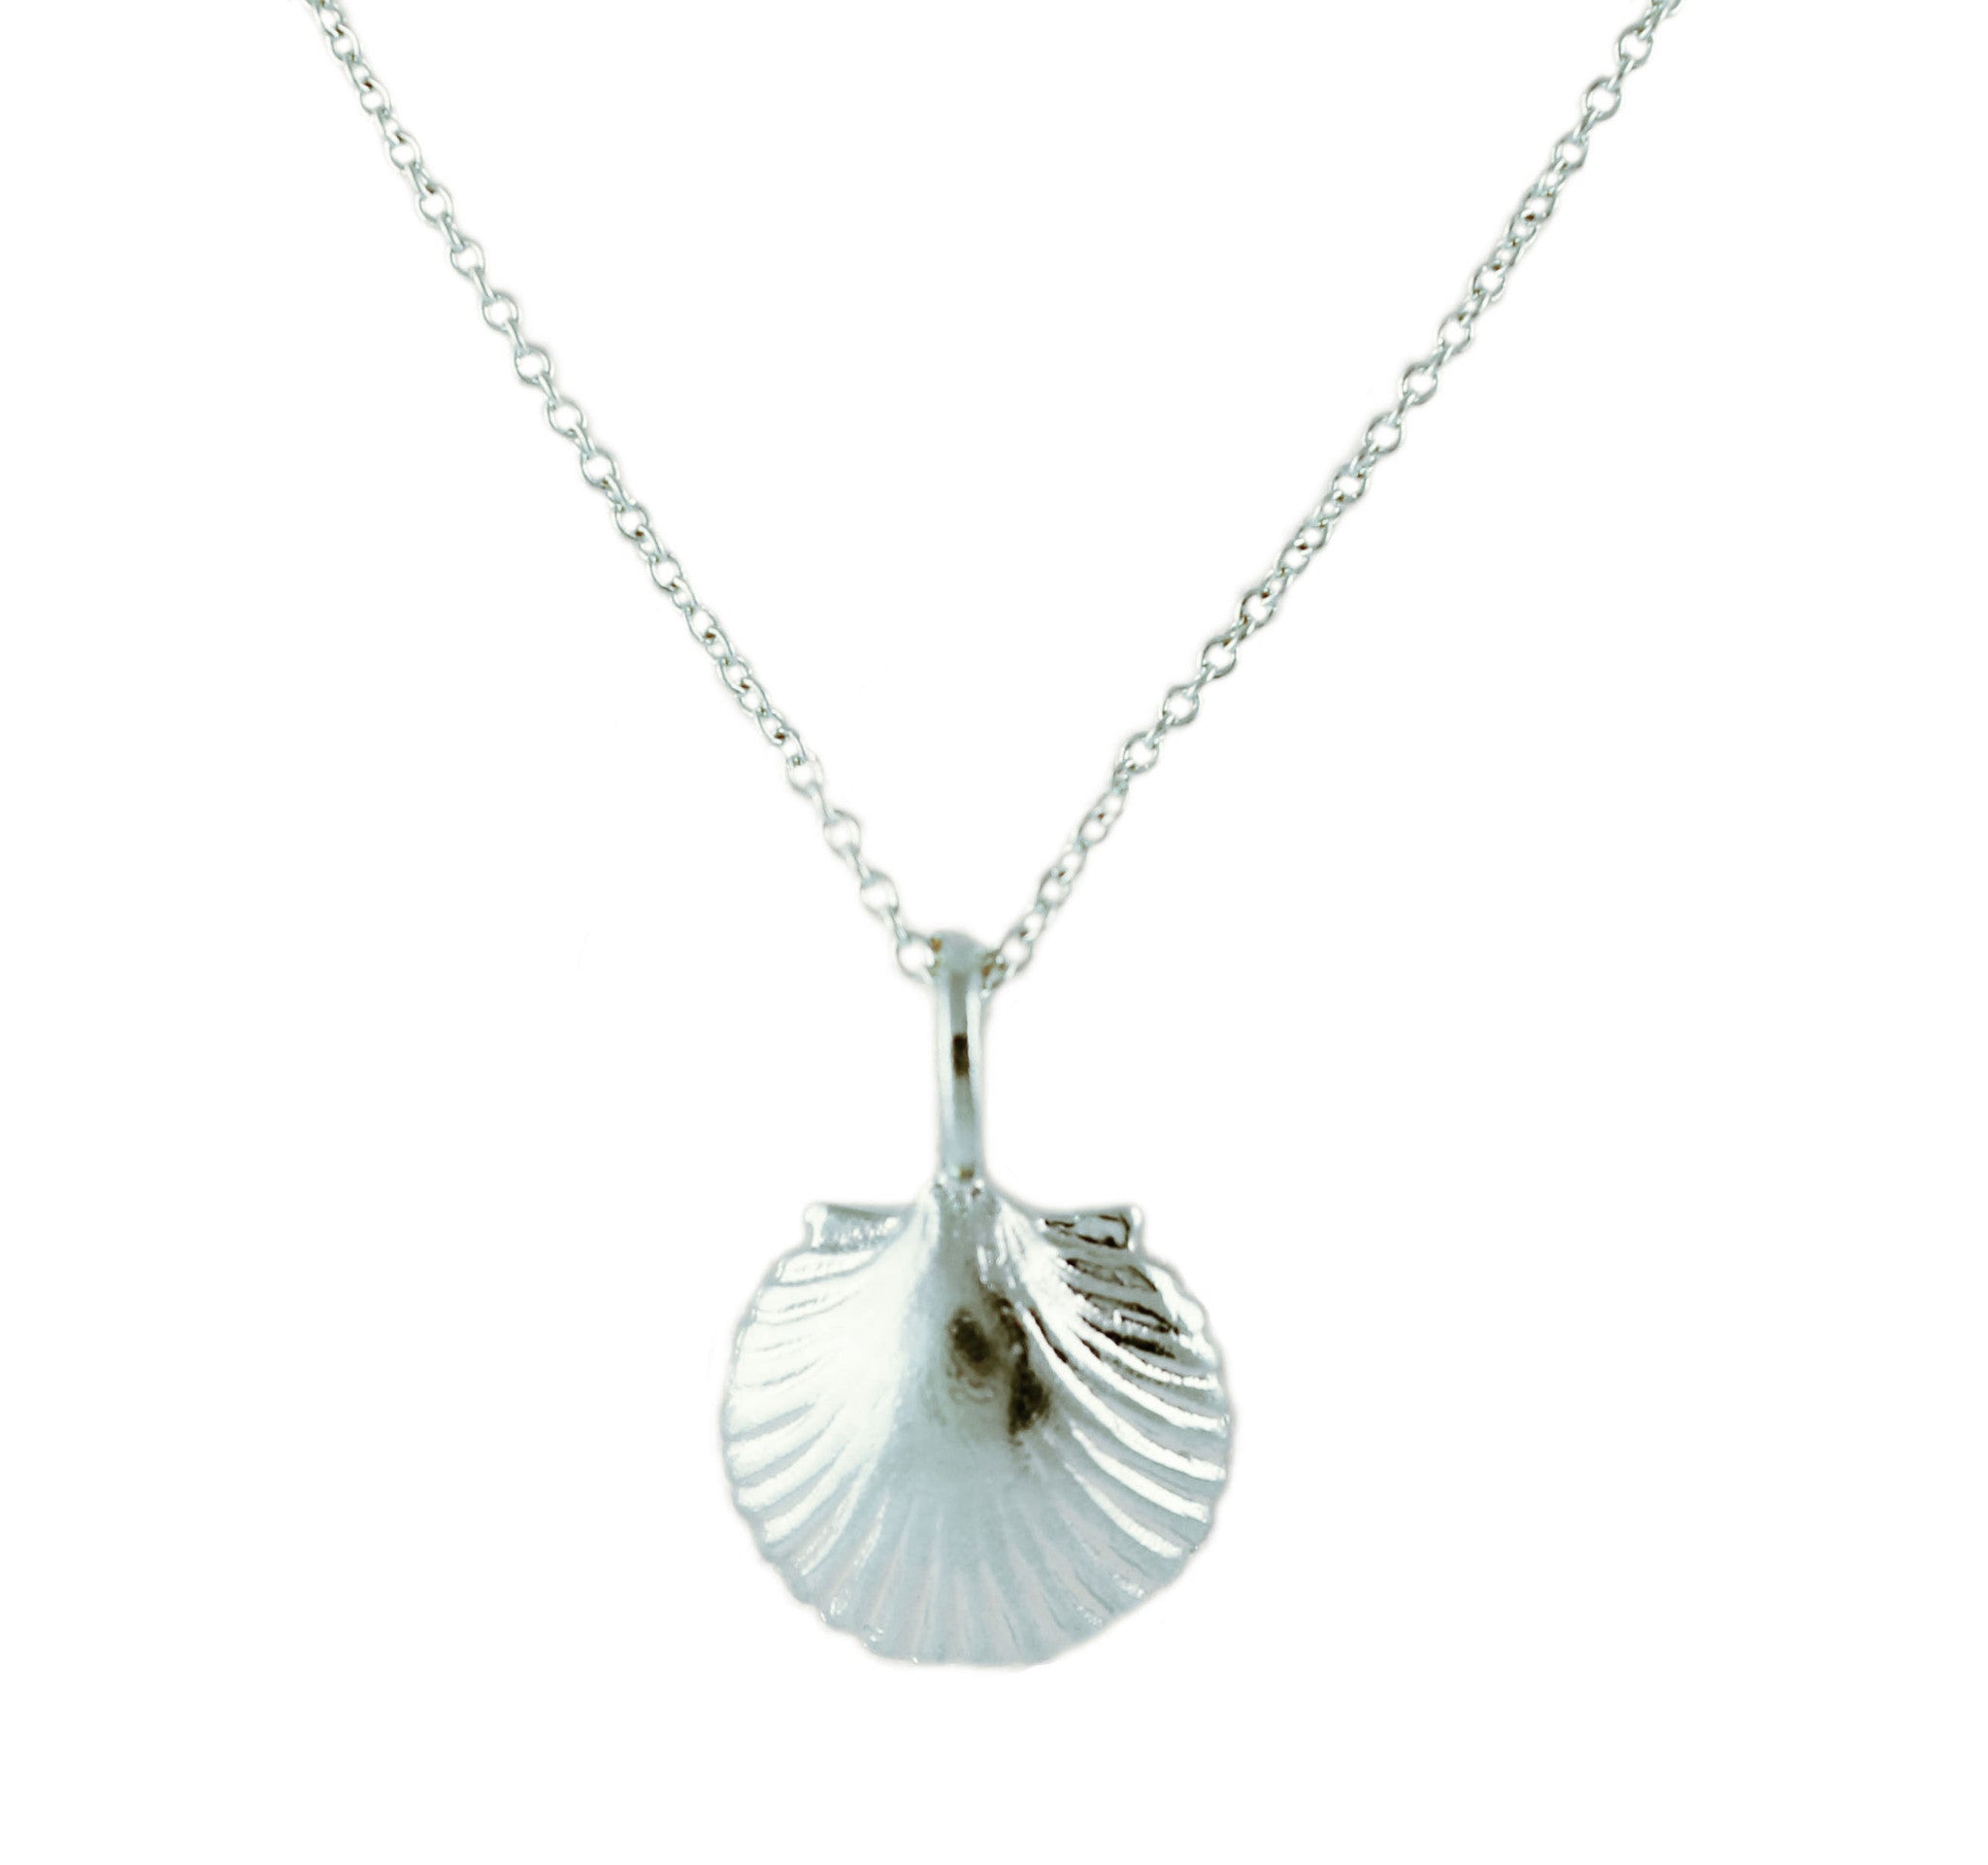 SHELL NECKLACE